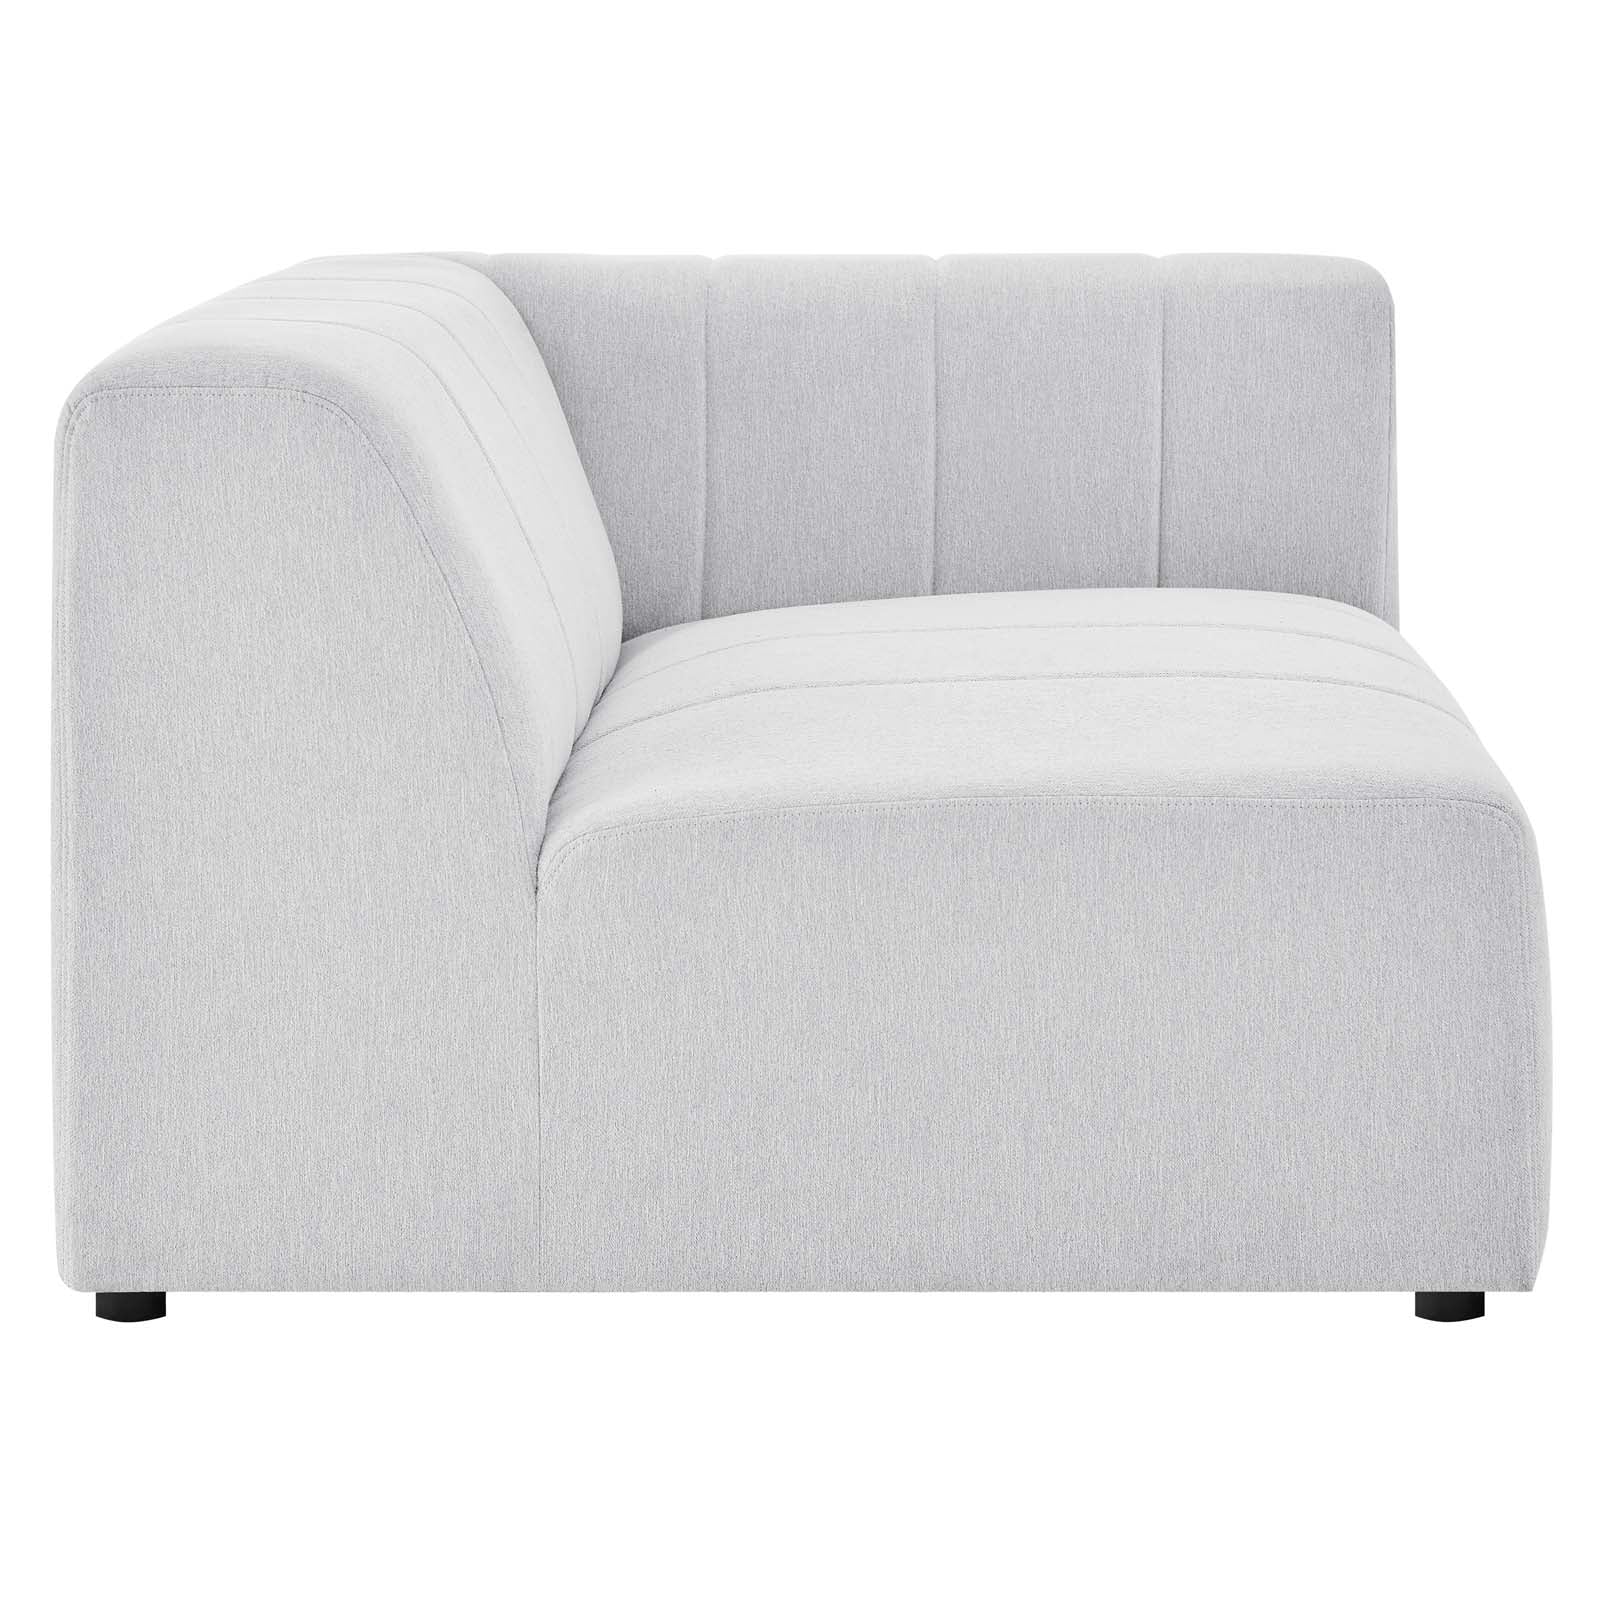 Modway Sectional Sofas - Bartlett Upholstered Fabric 4-Piece Sectional Sofa Ivory